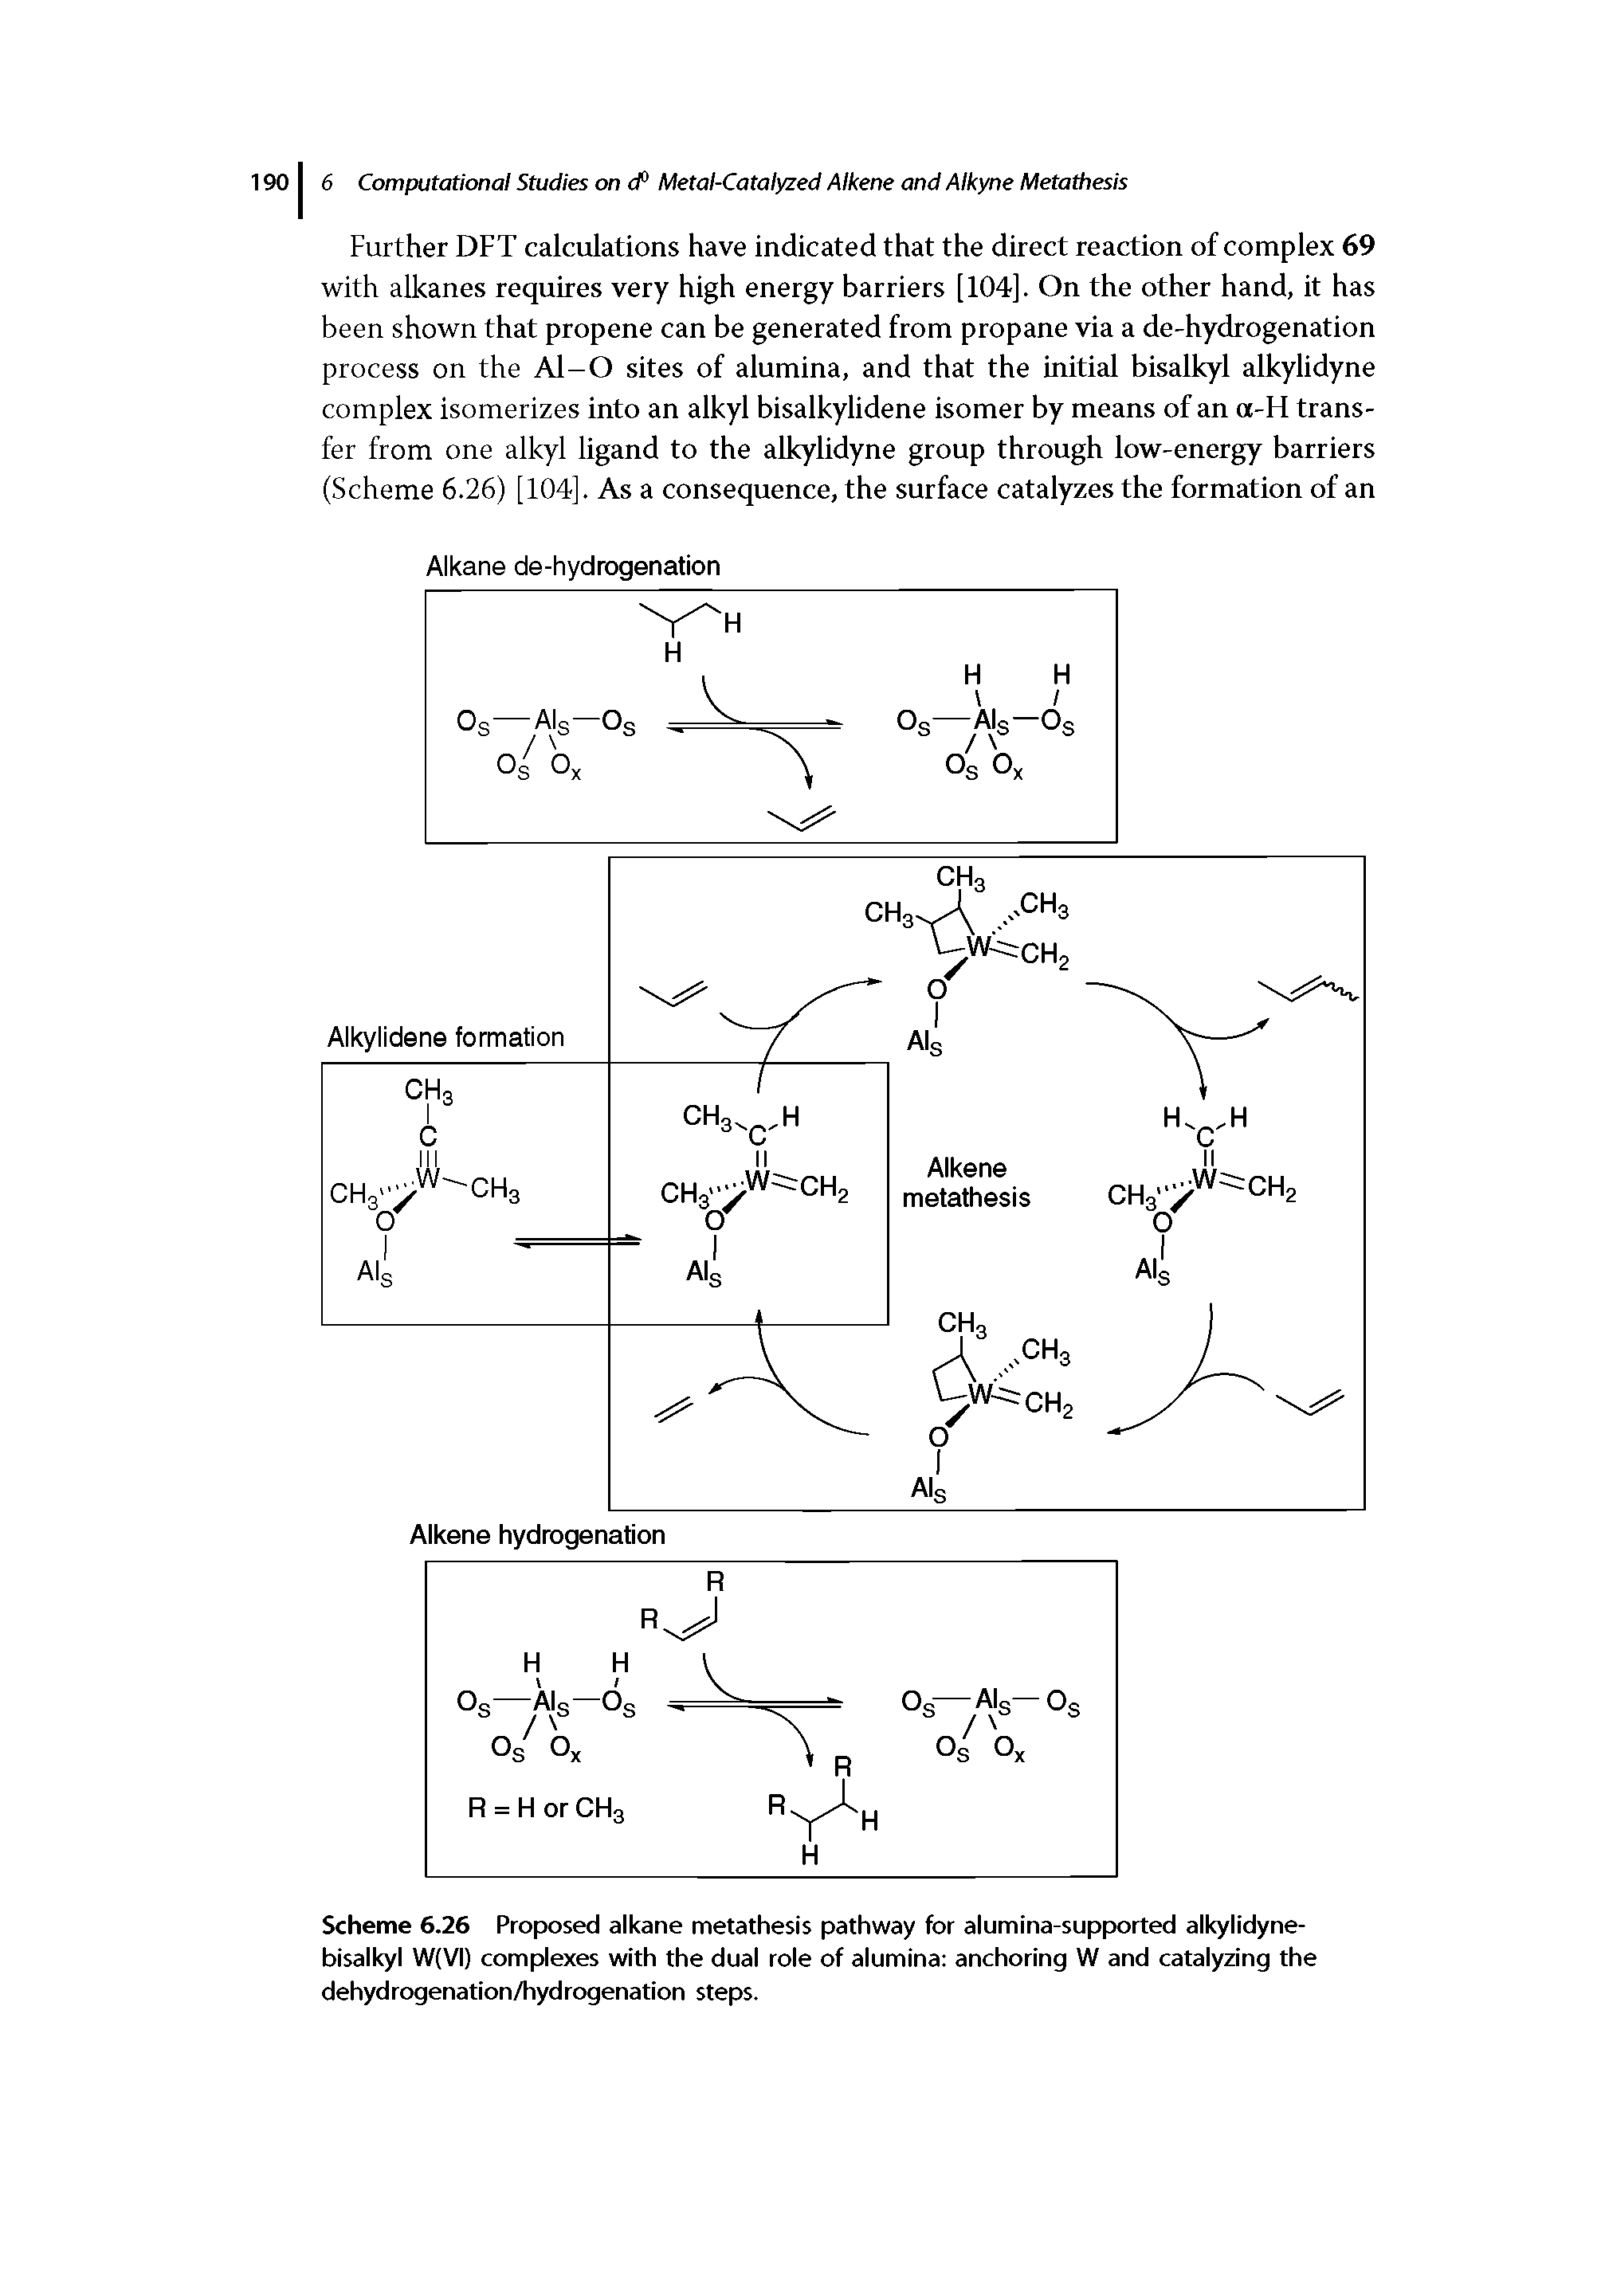 Scheme 6.26 Proposed alkane metathesis pathway for alumina-supported alkylidyne-bisalkyl W(VI) complexes with the dual role of alumina anchoring W and catalyzing the dehydrogenation/hydrogenation steps.